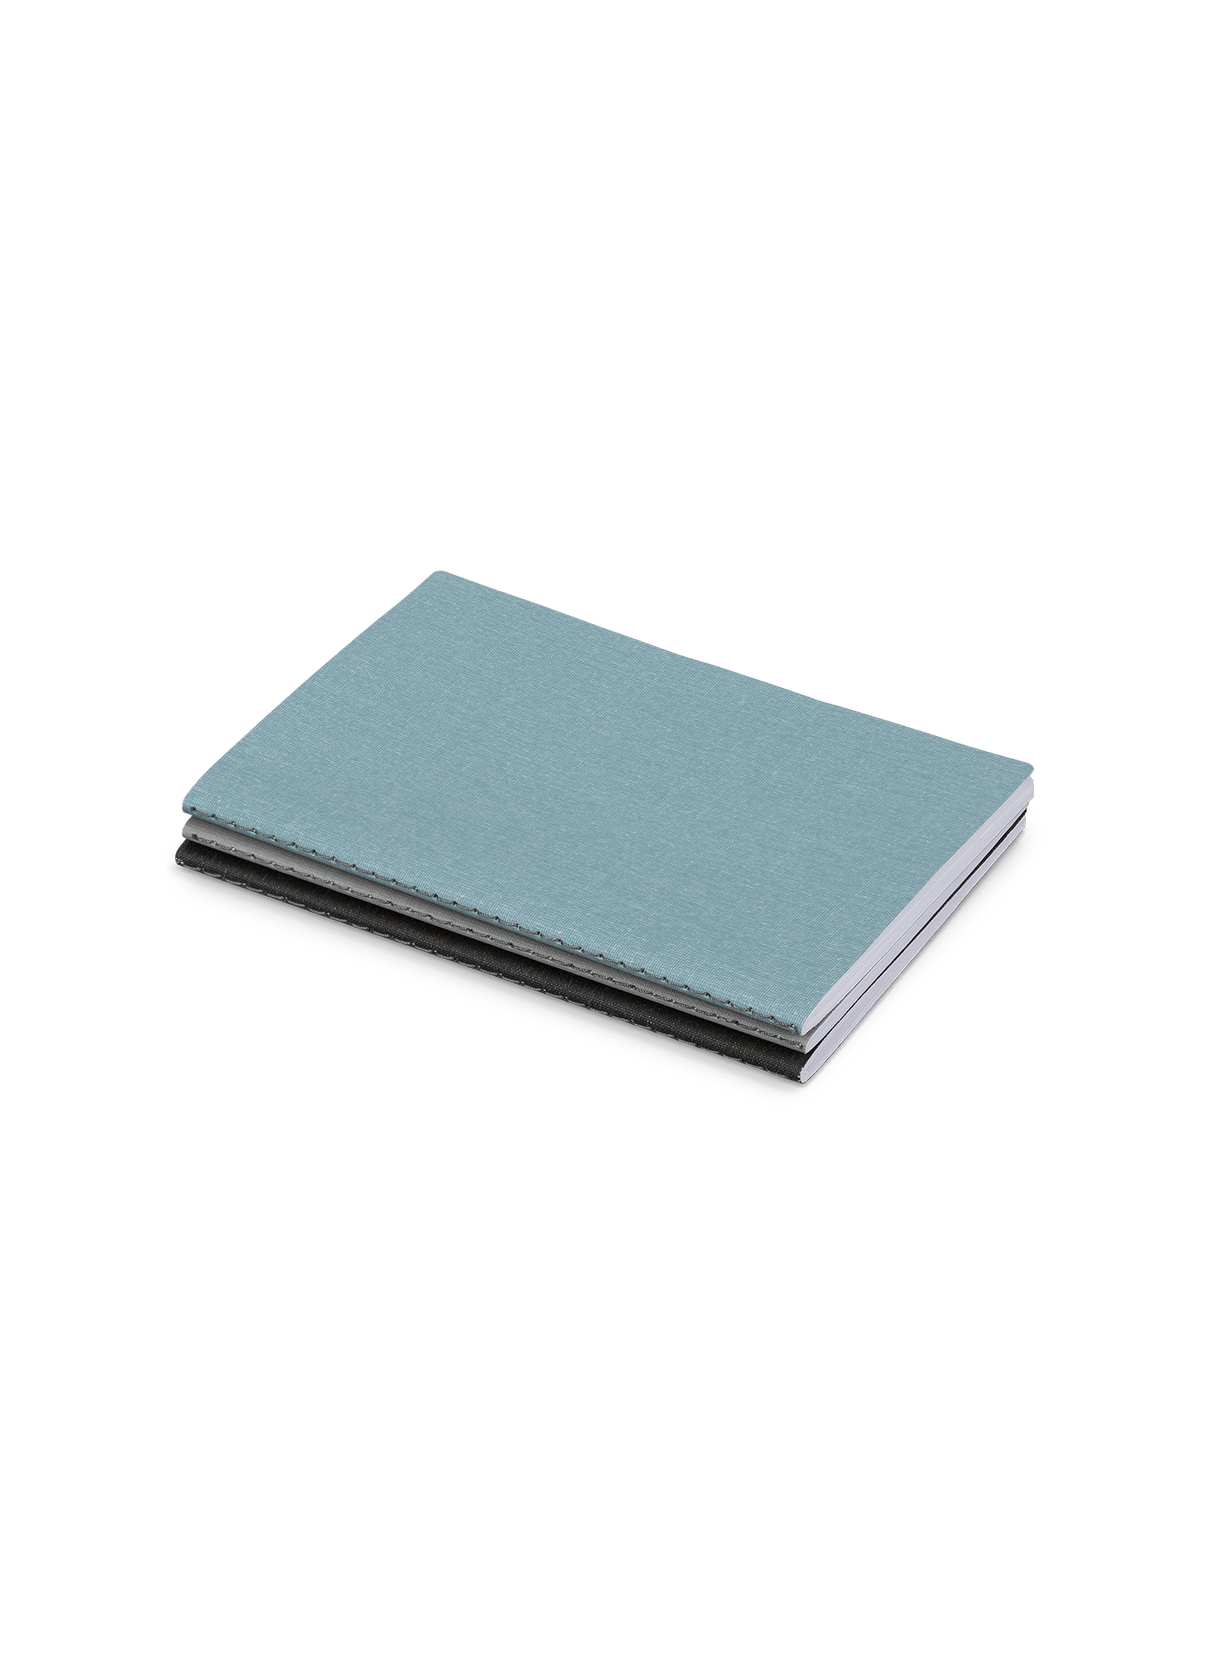 Appointed Mini Linen Jotter in Chambray Blue, Dove Gray, and Charcoal Gray bookcloth stacked angled view